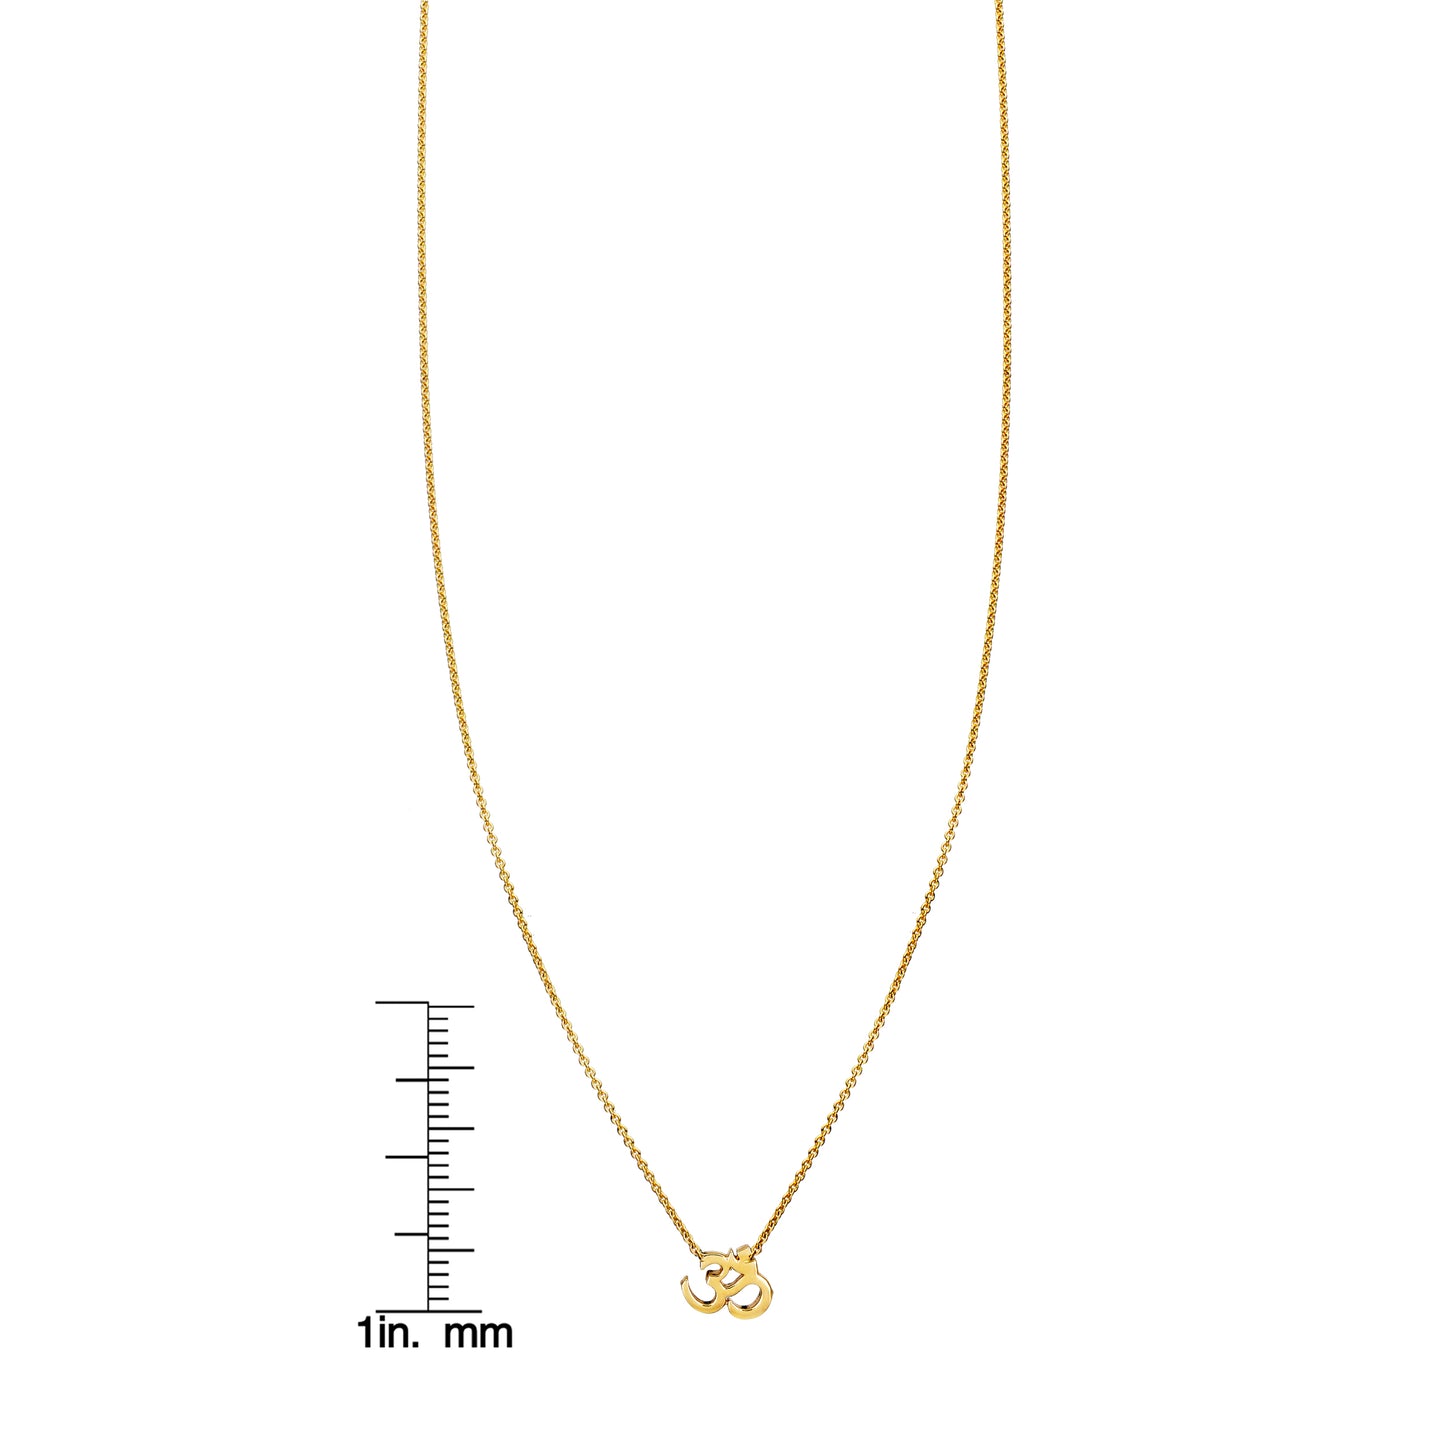 petite gold ohm necklace with ruler